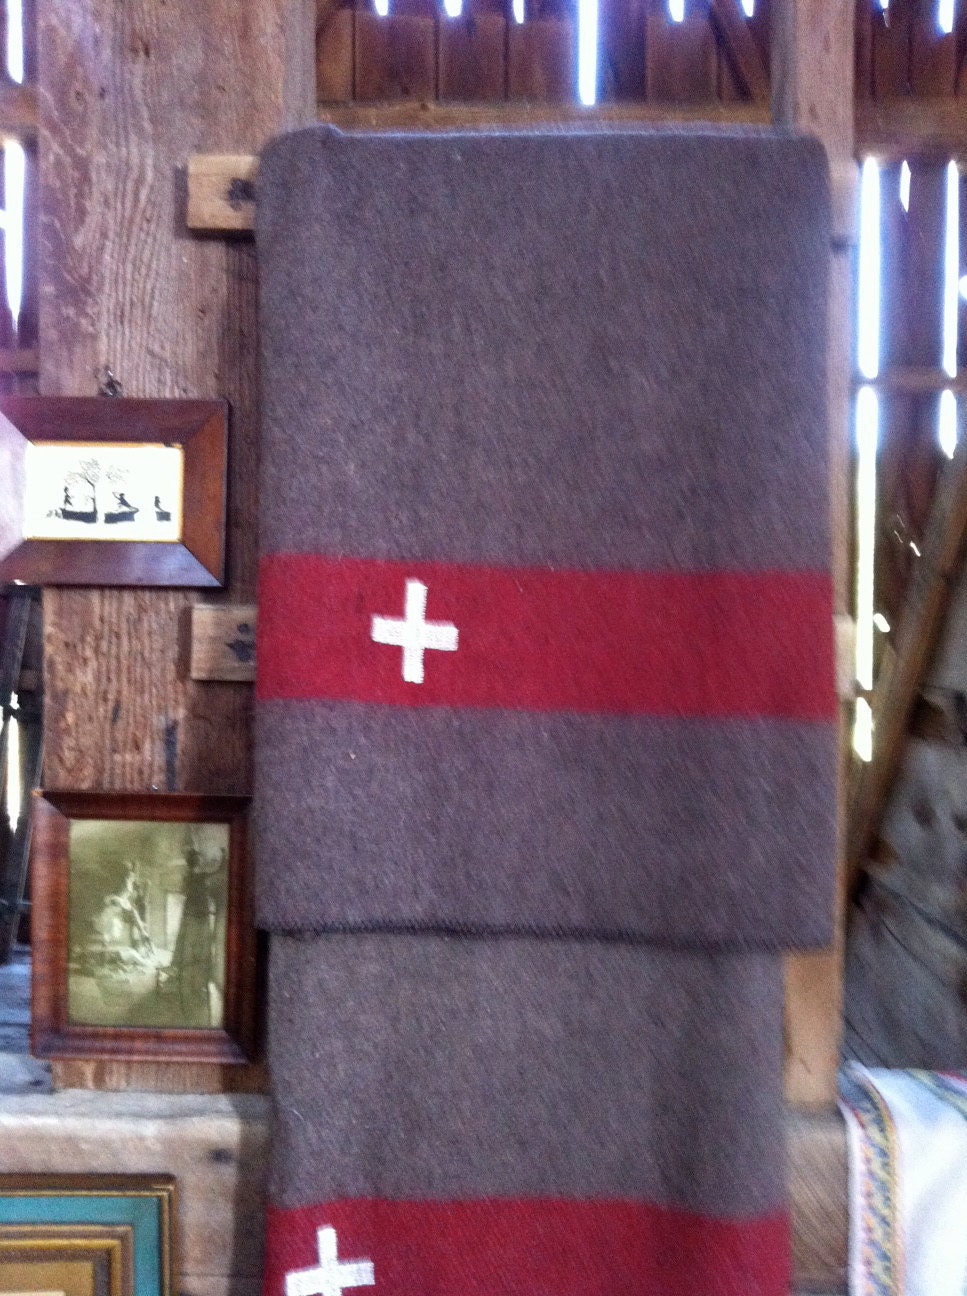 authentic Swiss Army wool blanket by OdeToJune on Etsy